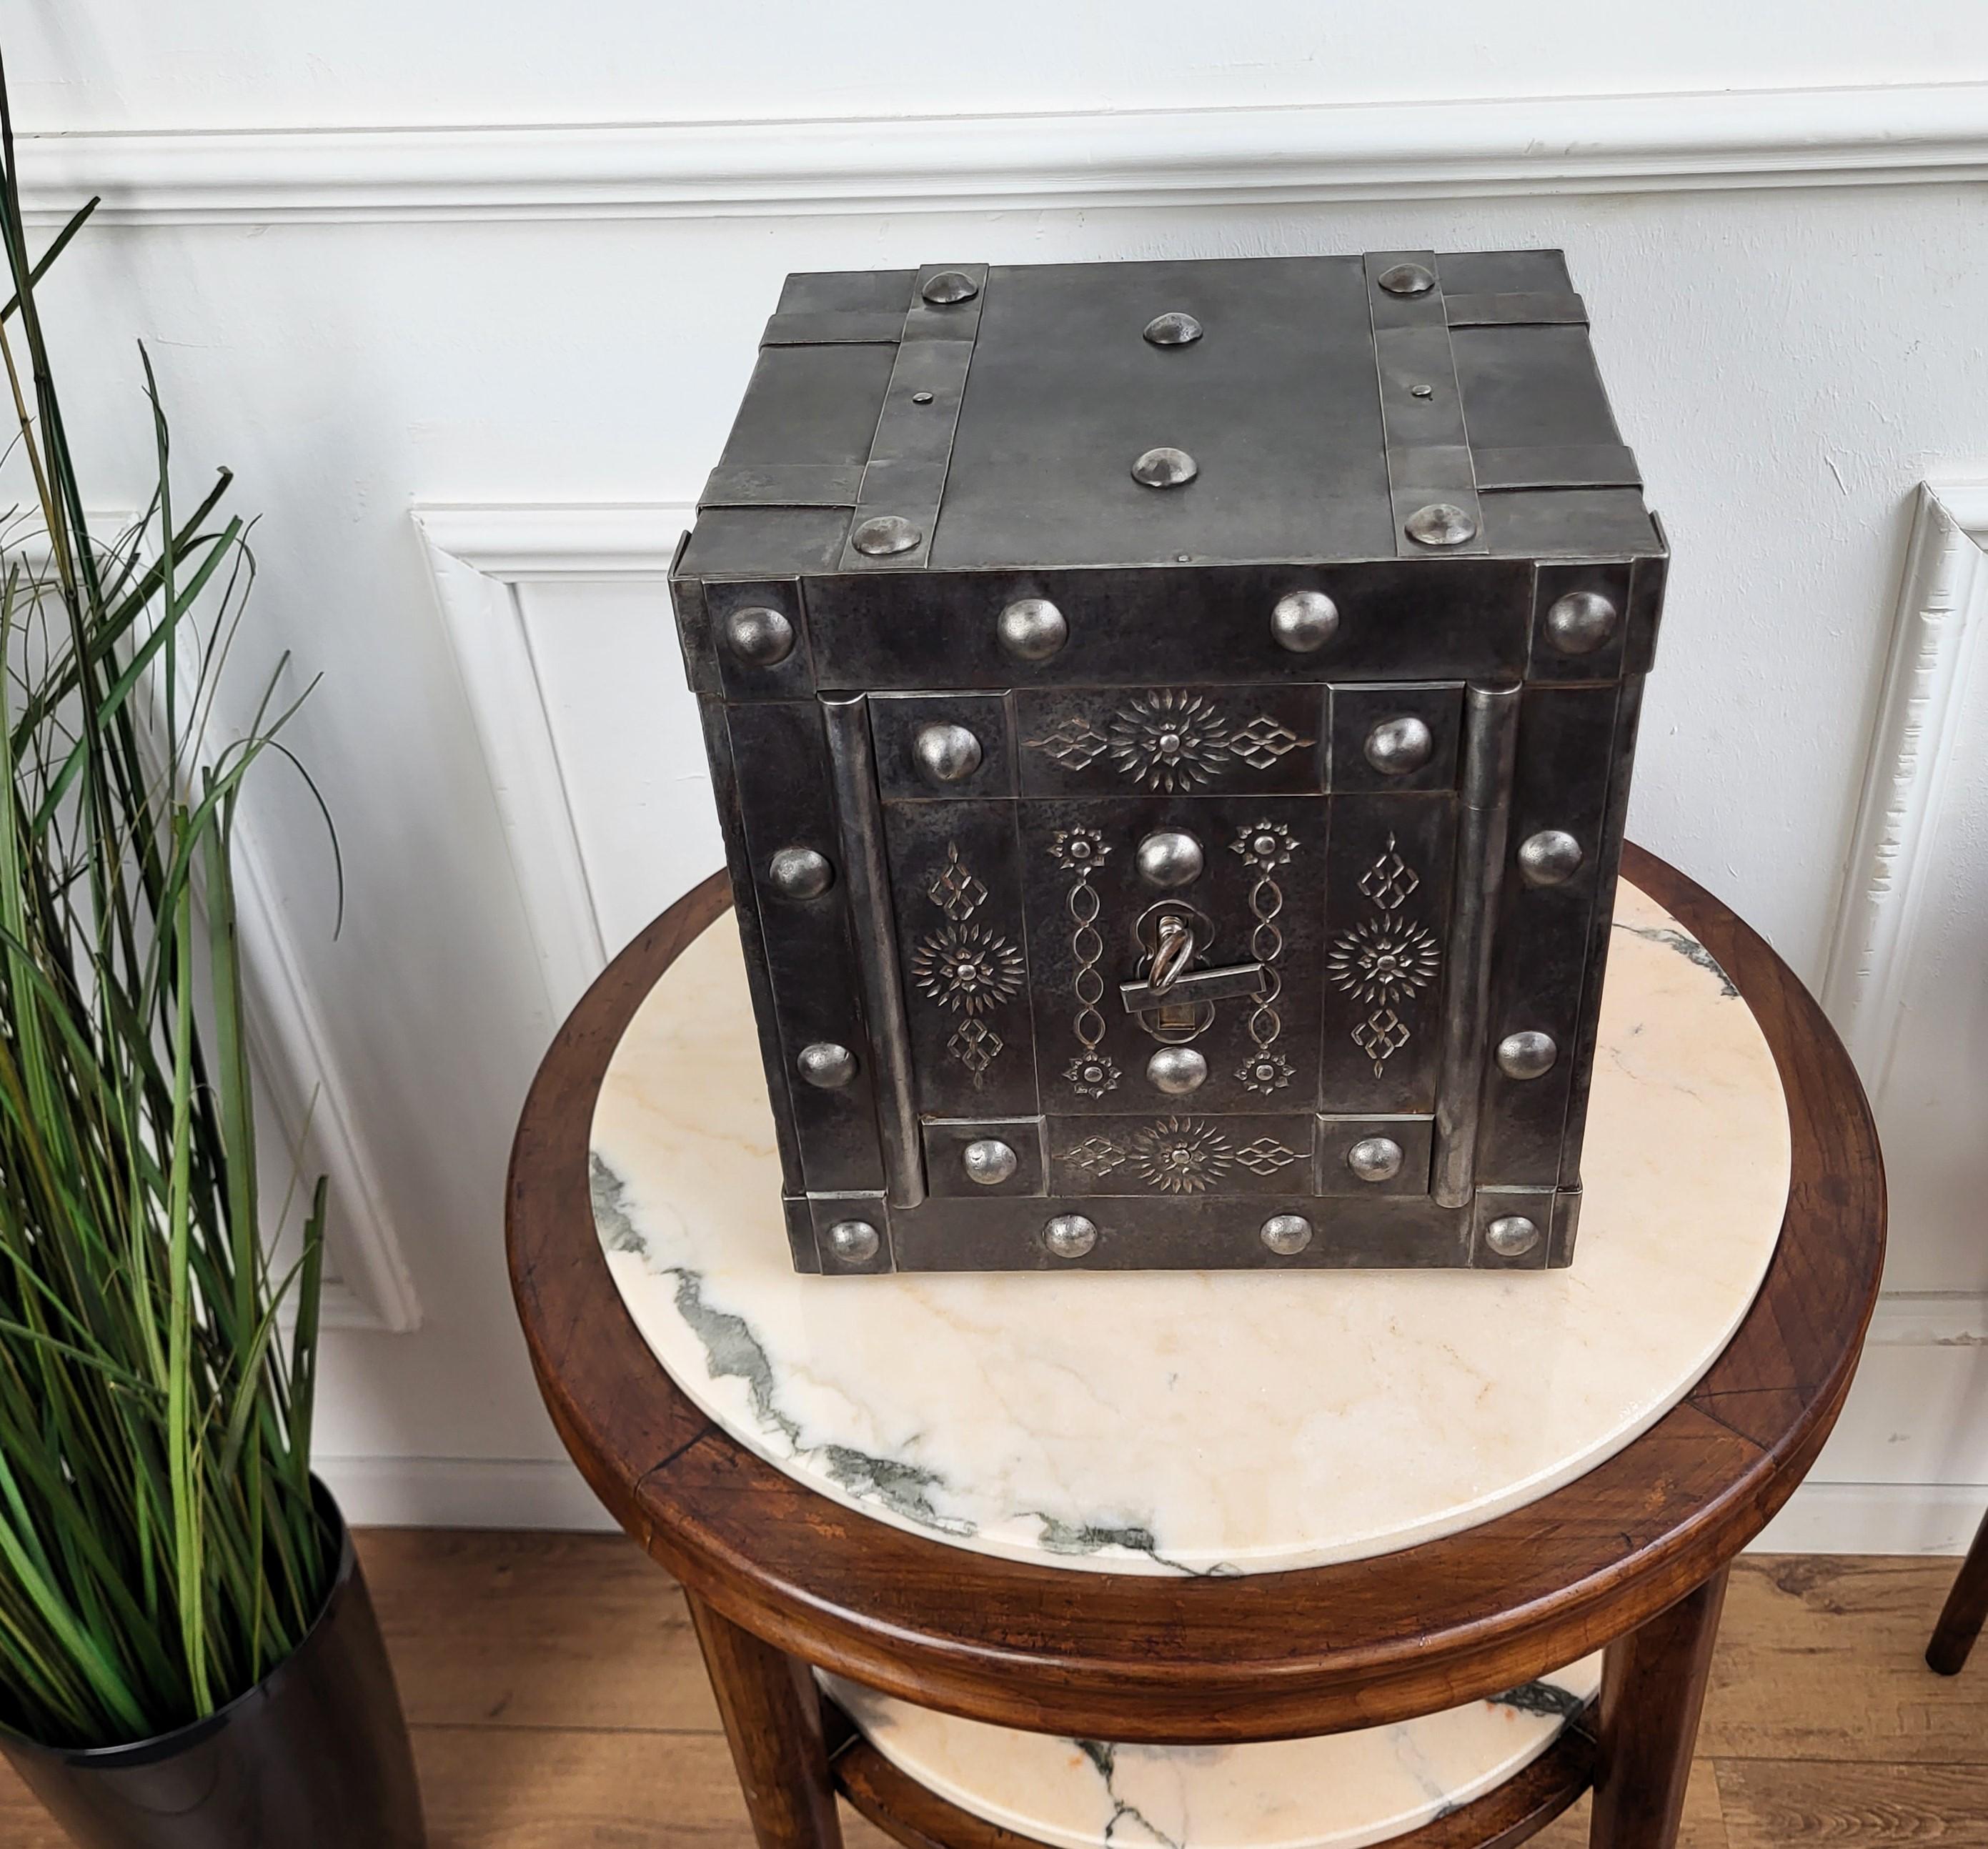 This beautiful Italian antique safe is a collector piece with typical all-around hobnails, dated circa 1820-1840, has a great metal color with patina of time and amazingly rich decorations, characterized by the central door with great burin